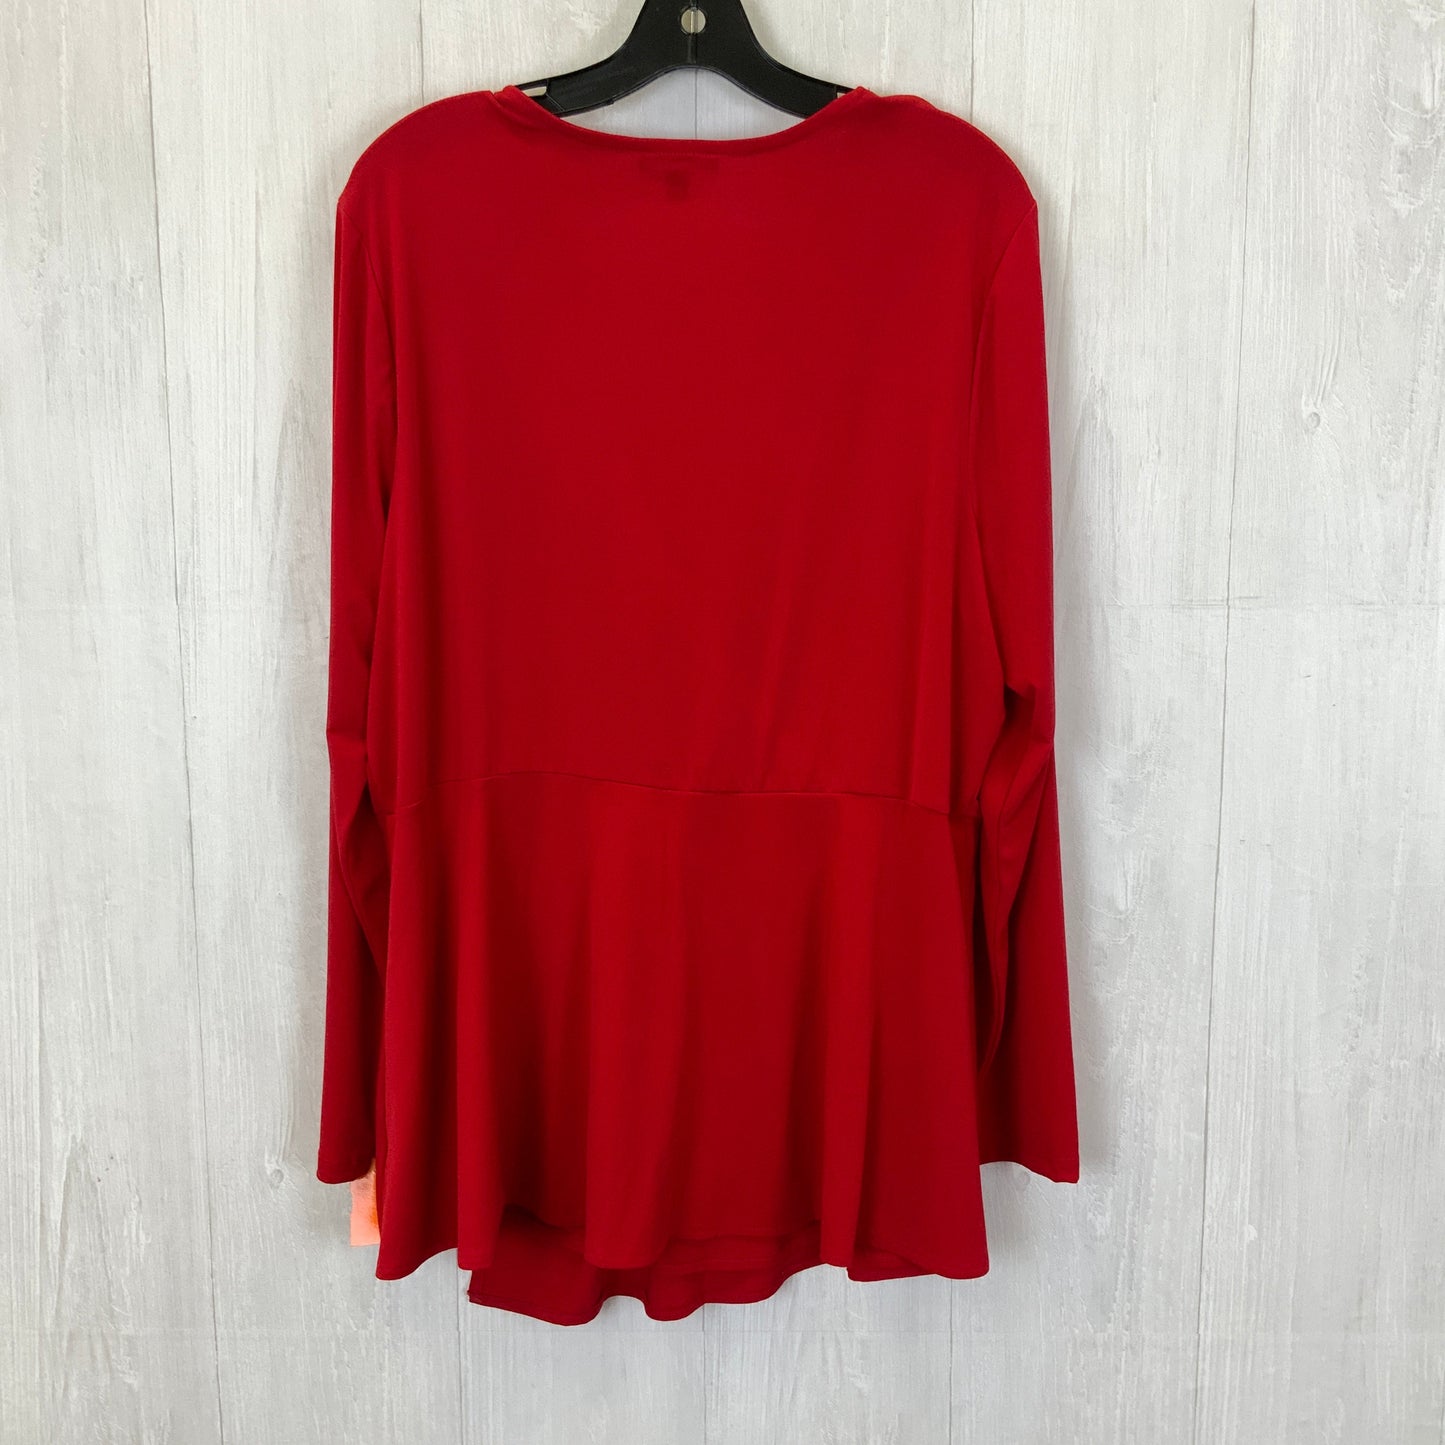 Red Top Long Sleeve Lane Bryant, Size 2x